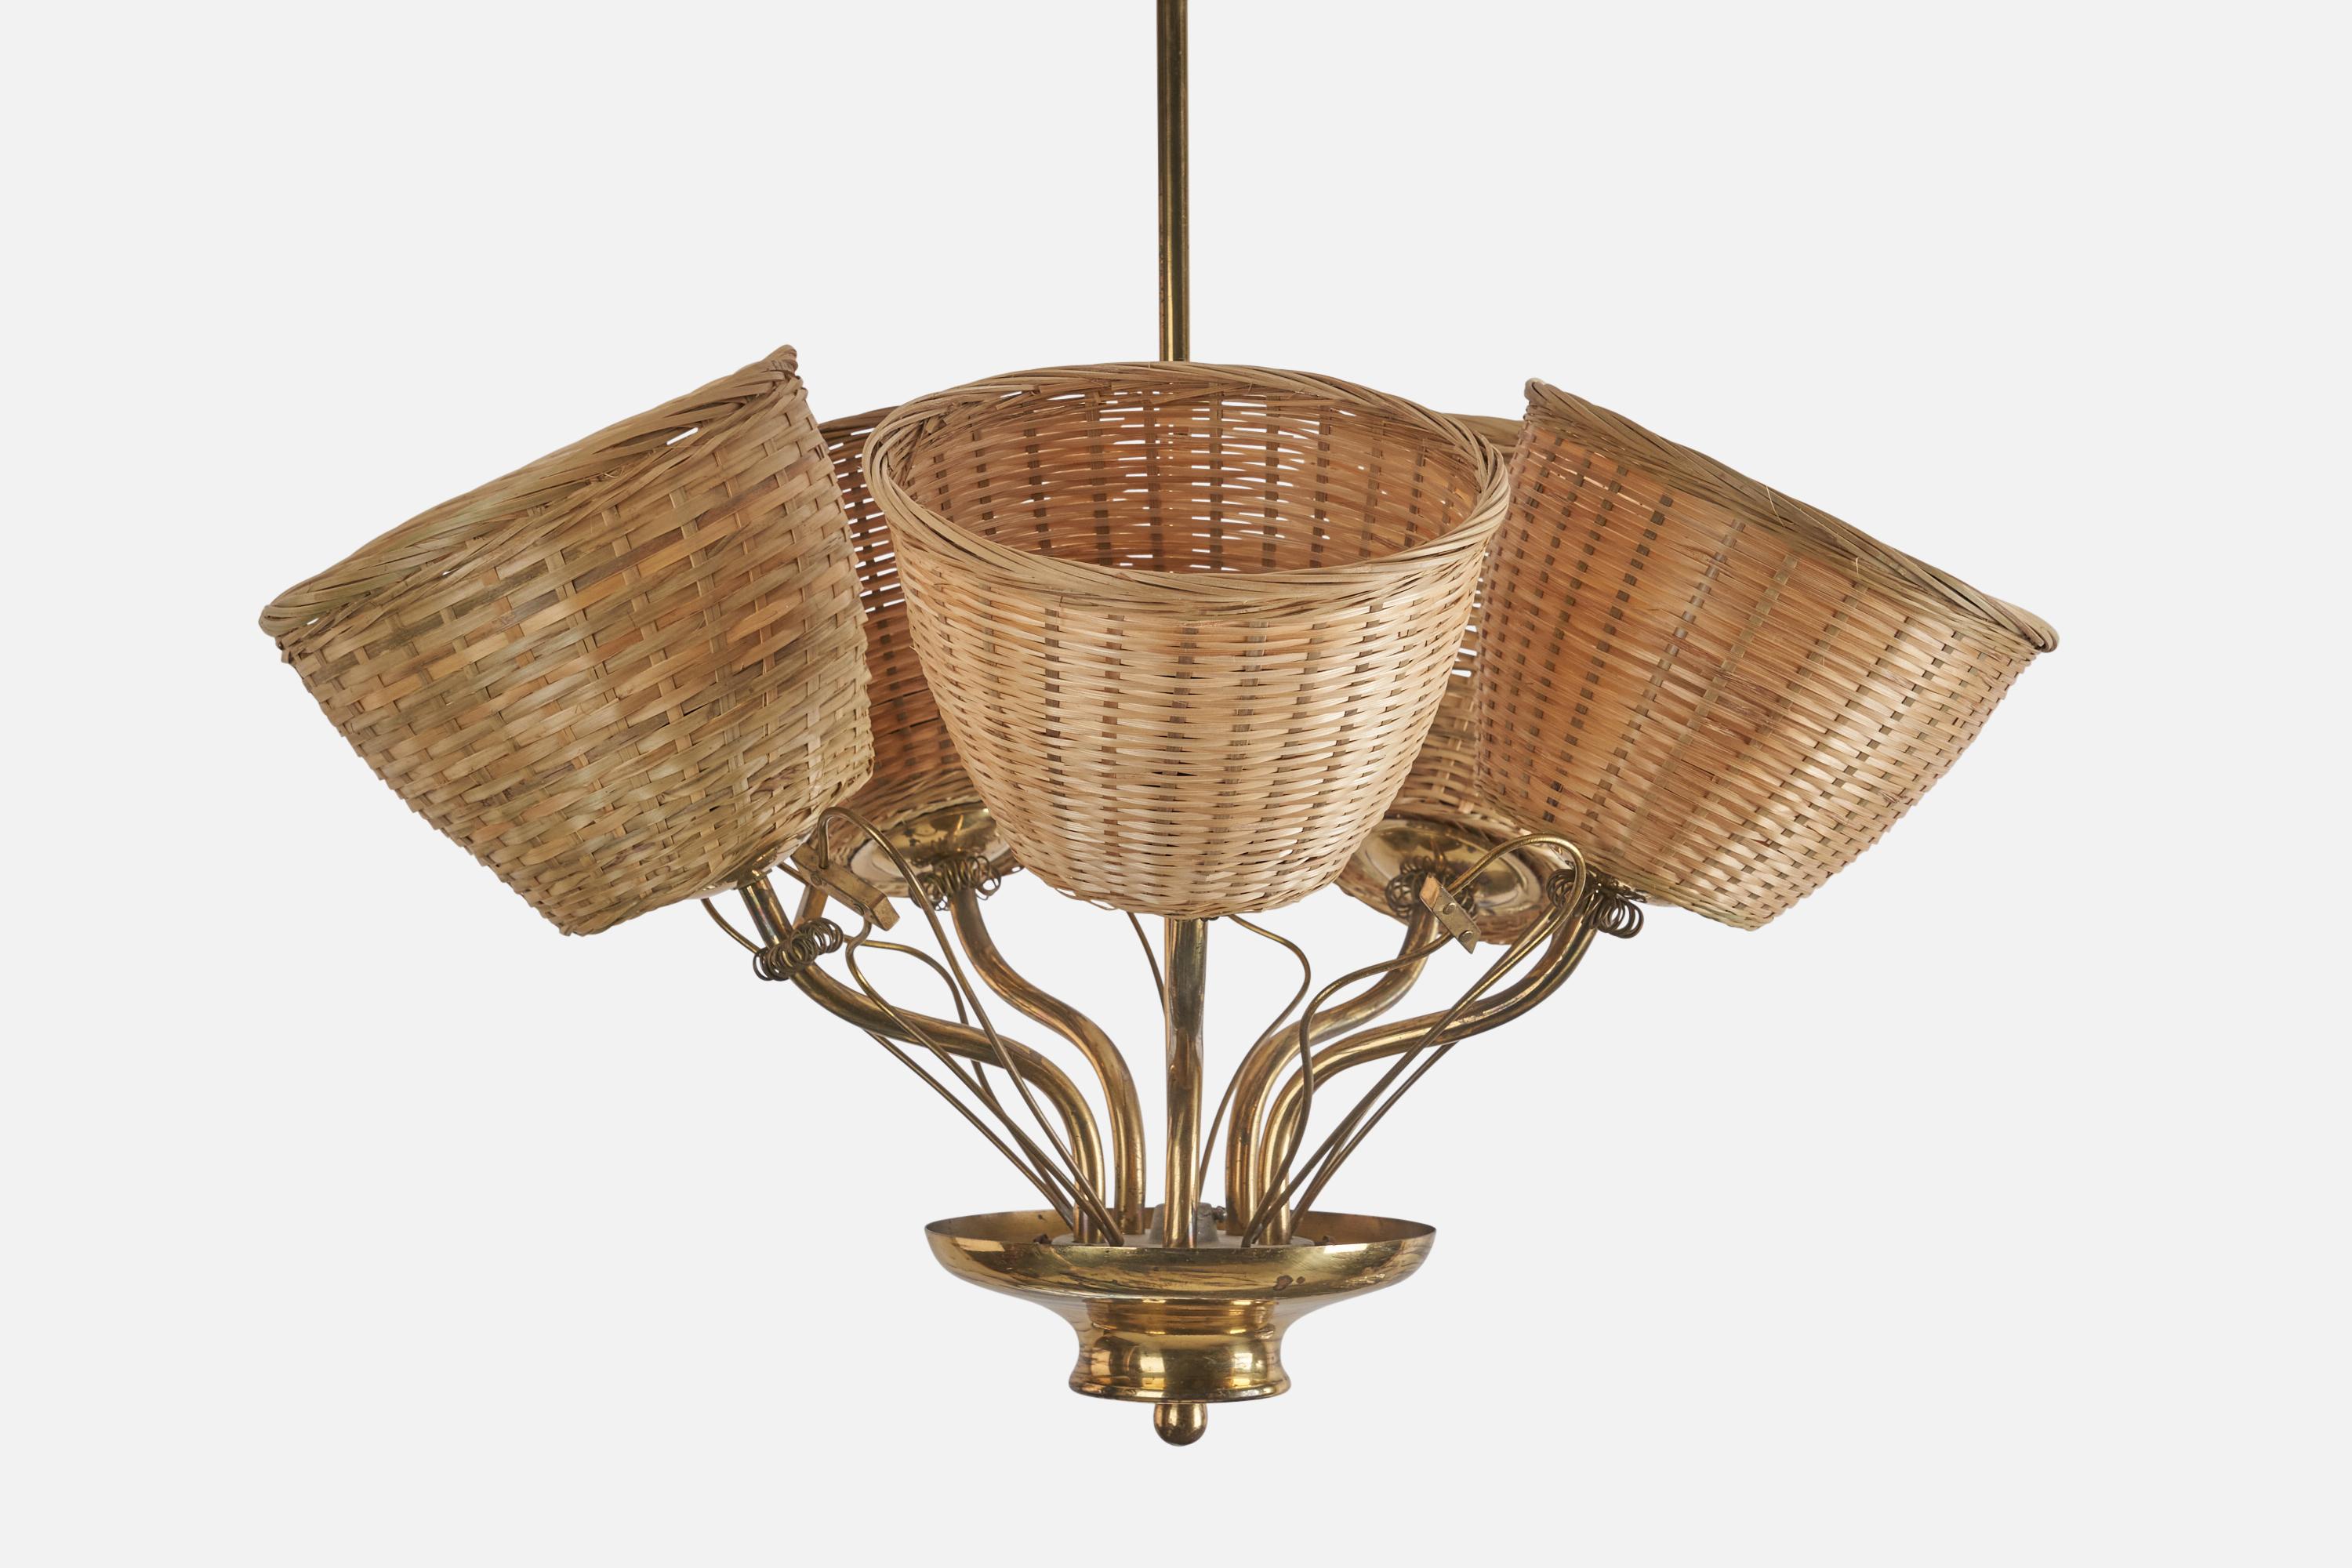 A brass and rattan chandelier designed and produced by a Finnish Designer, Finland, 1940s.

Dimensions of Canopy (inches) : 3 x 3.8 x 3.8 (Height x Width x Depth) 

Sockets take standard E-26 medium base bulbs.

There is no maximum wattage